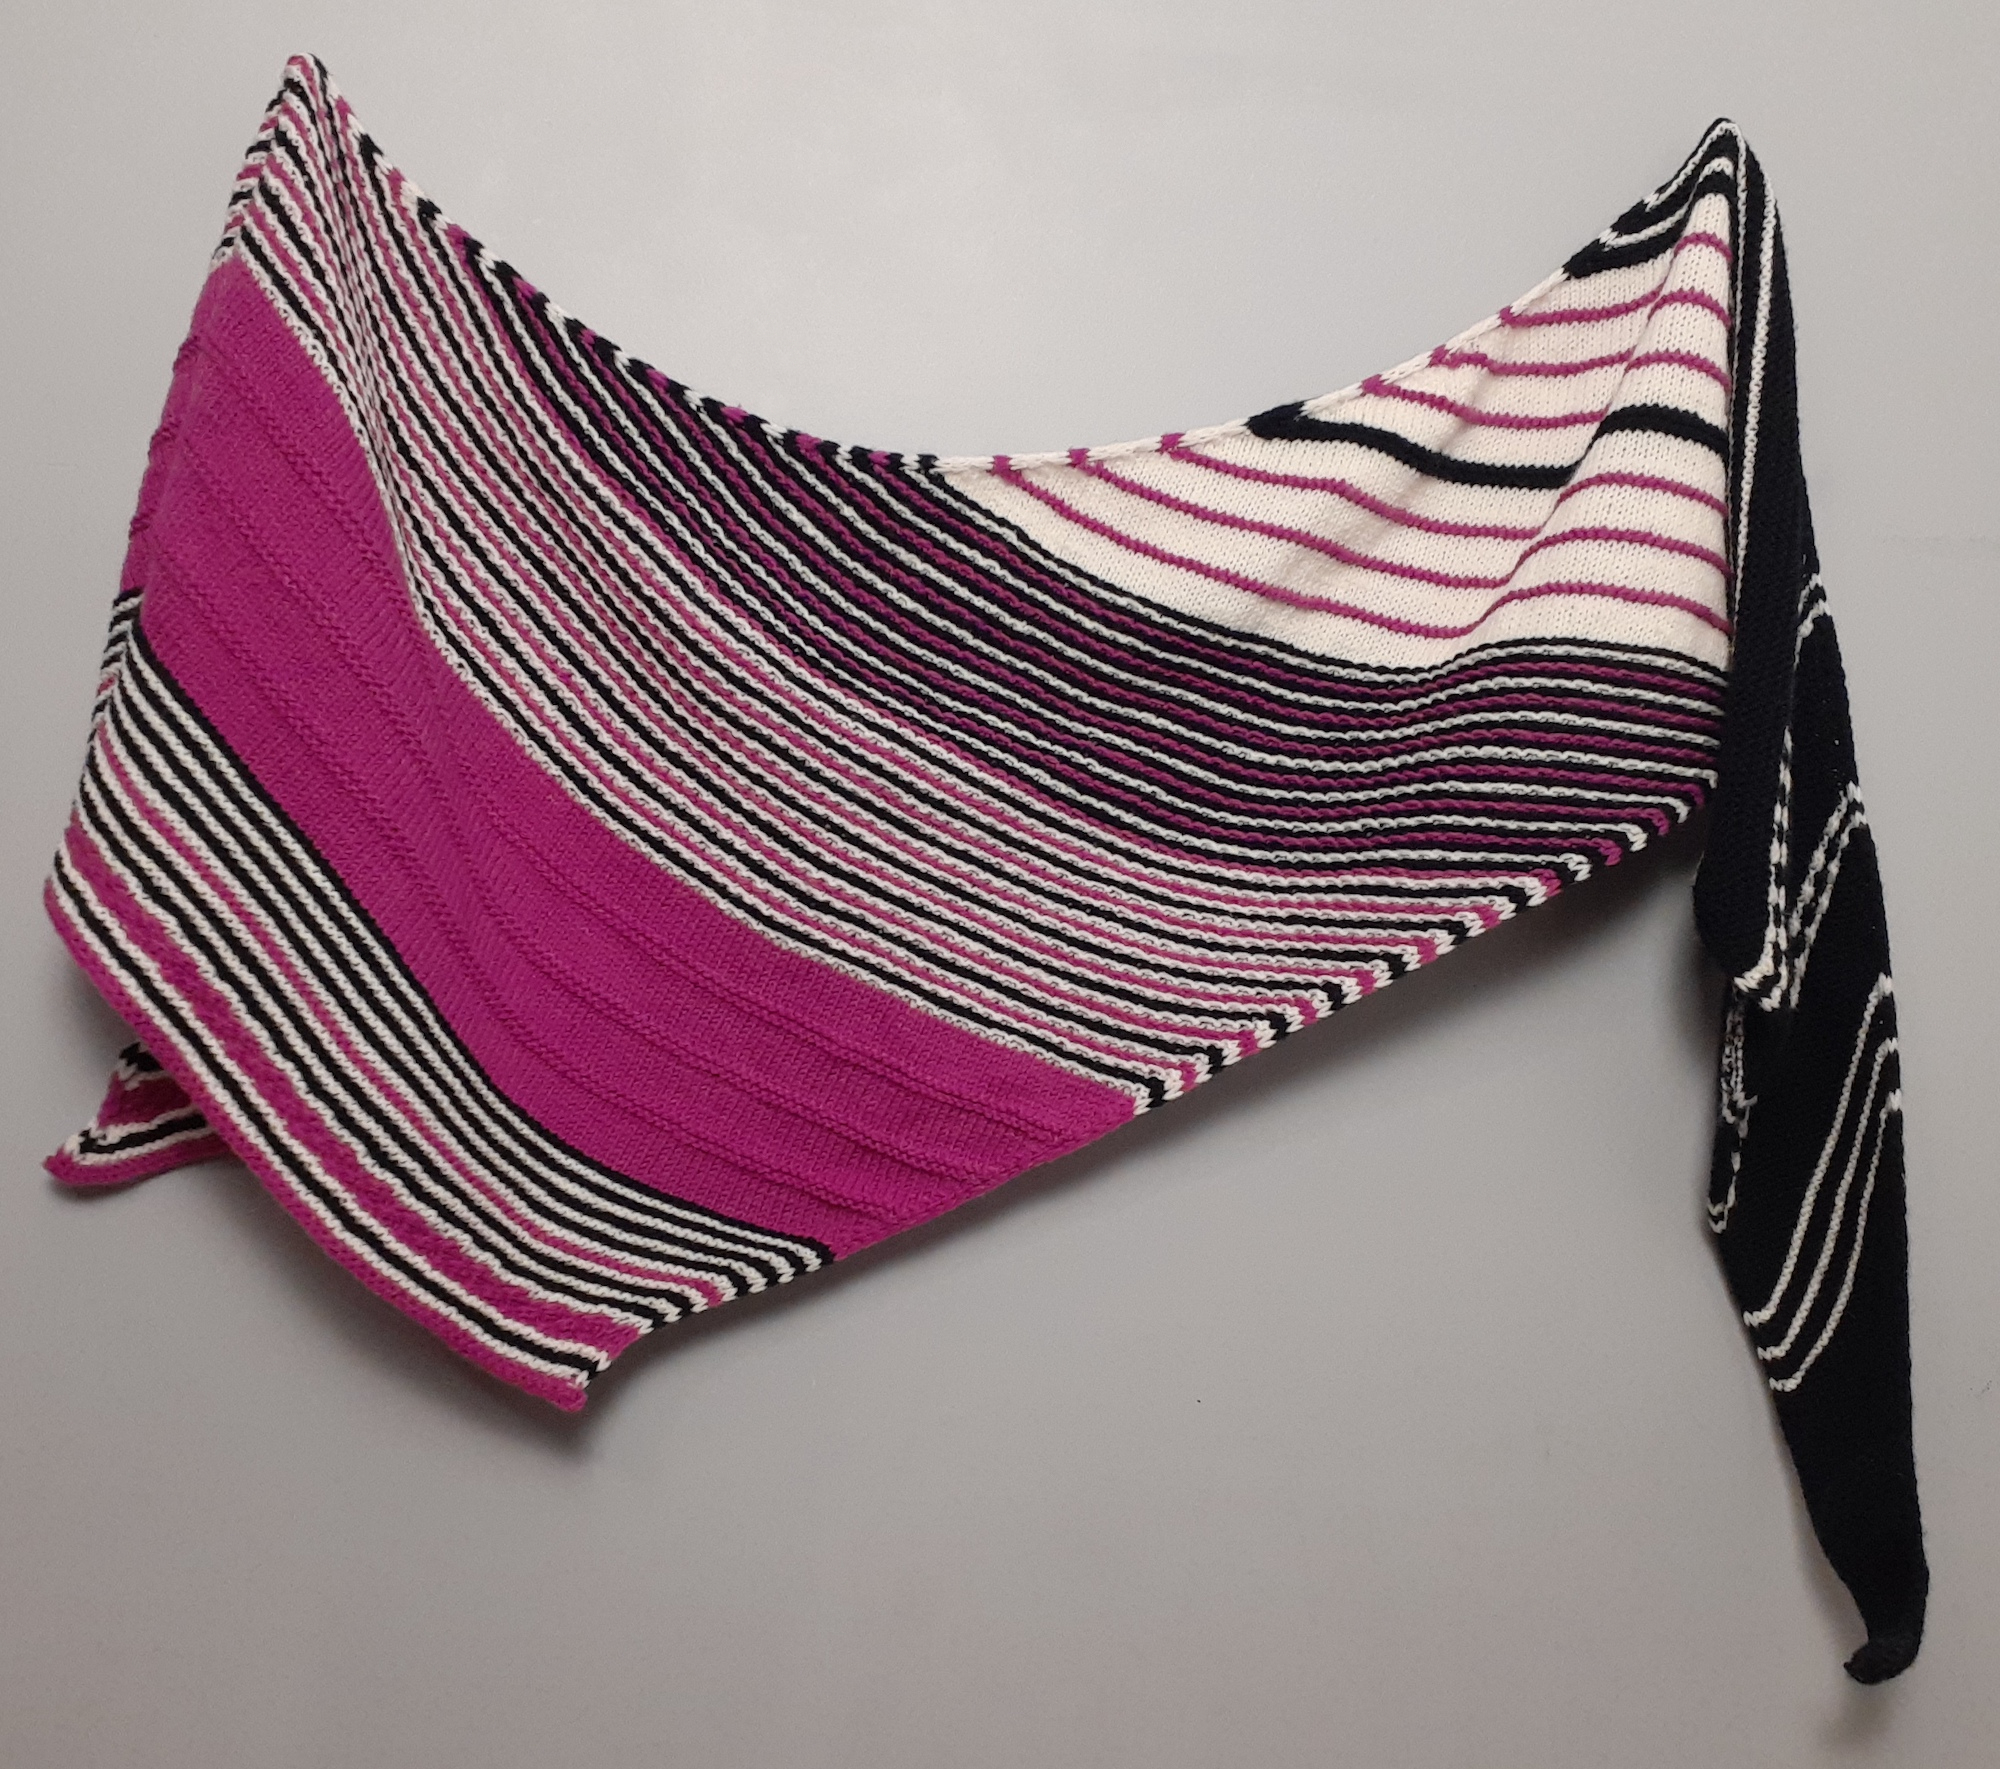 Tonia Lyons True Blue Shawl in hot pink, navy blue and cream hanging on a gray wall